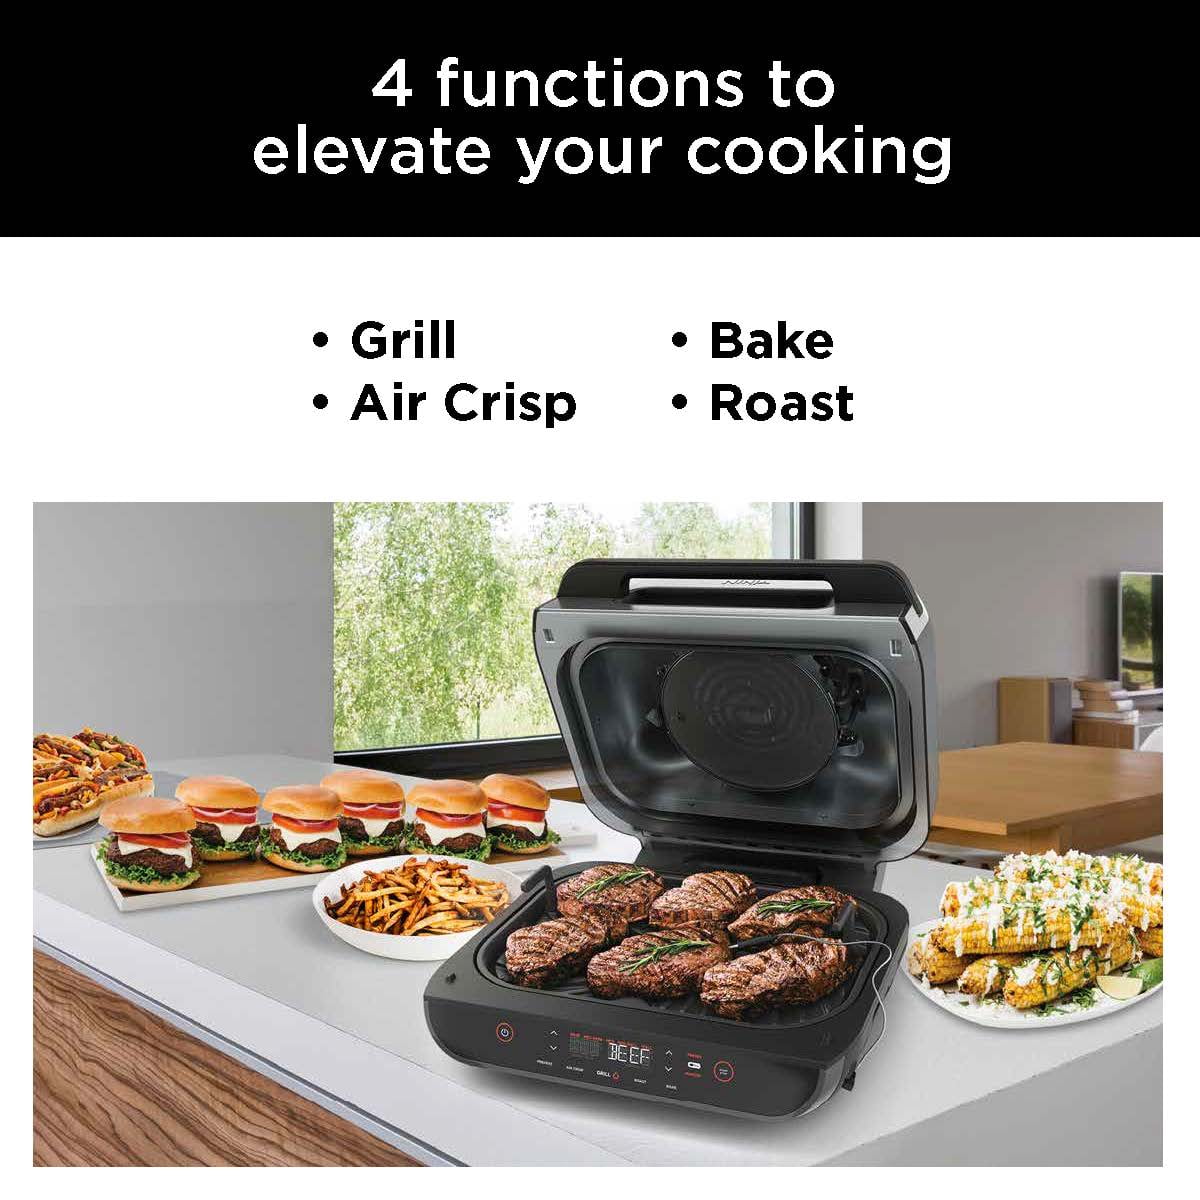 Ninja Foodi Smart XL 4-in-1 Indoor Grill with 4-Quart Air Fryer, Roast,  Bake, and Smart Cook System, FG550 